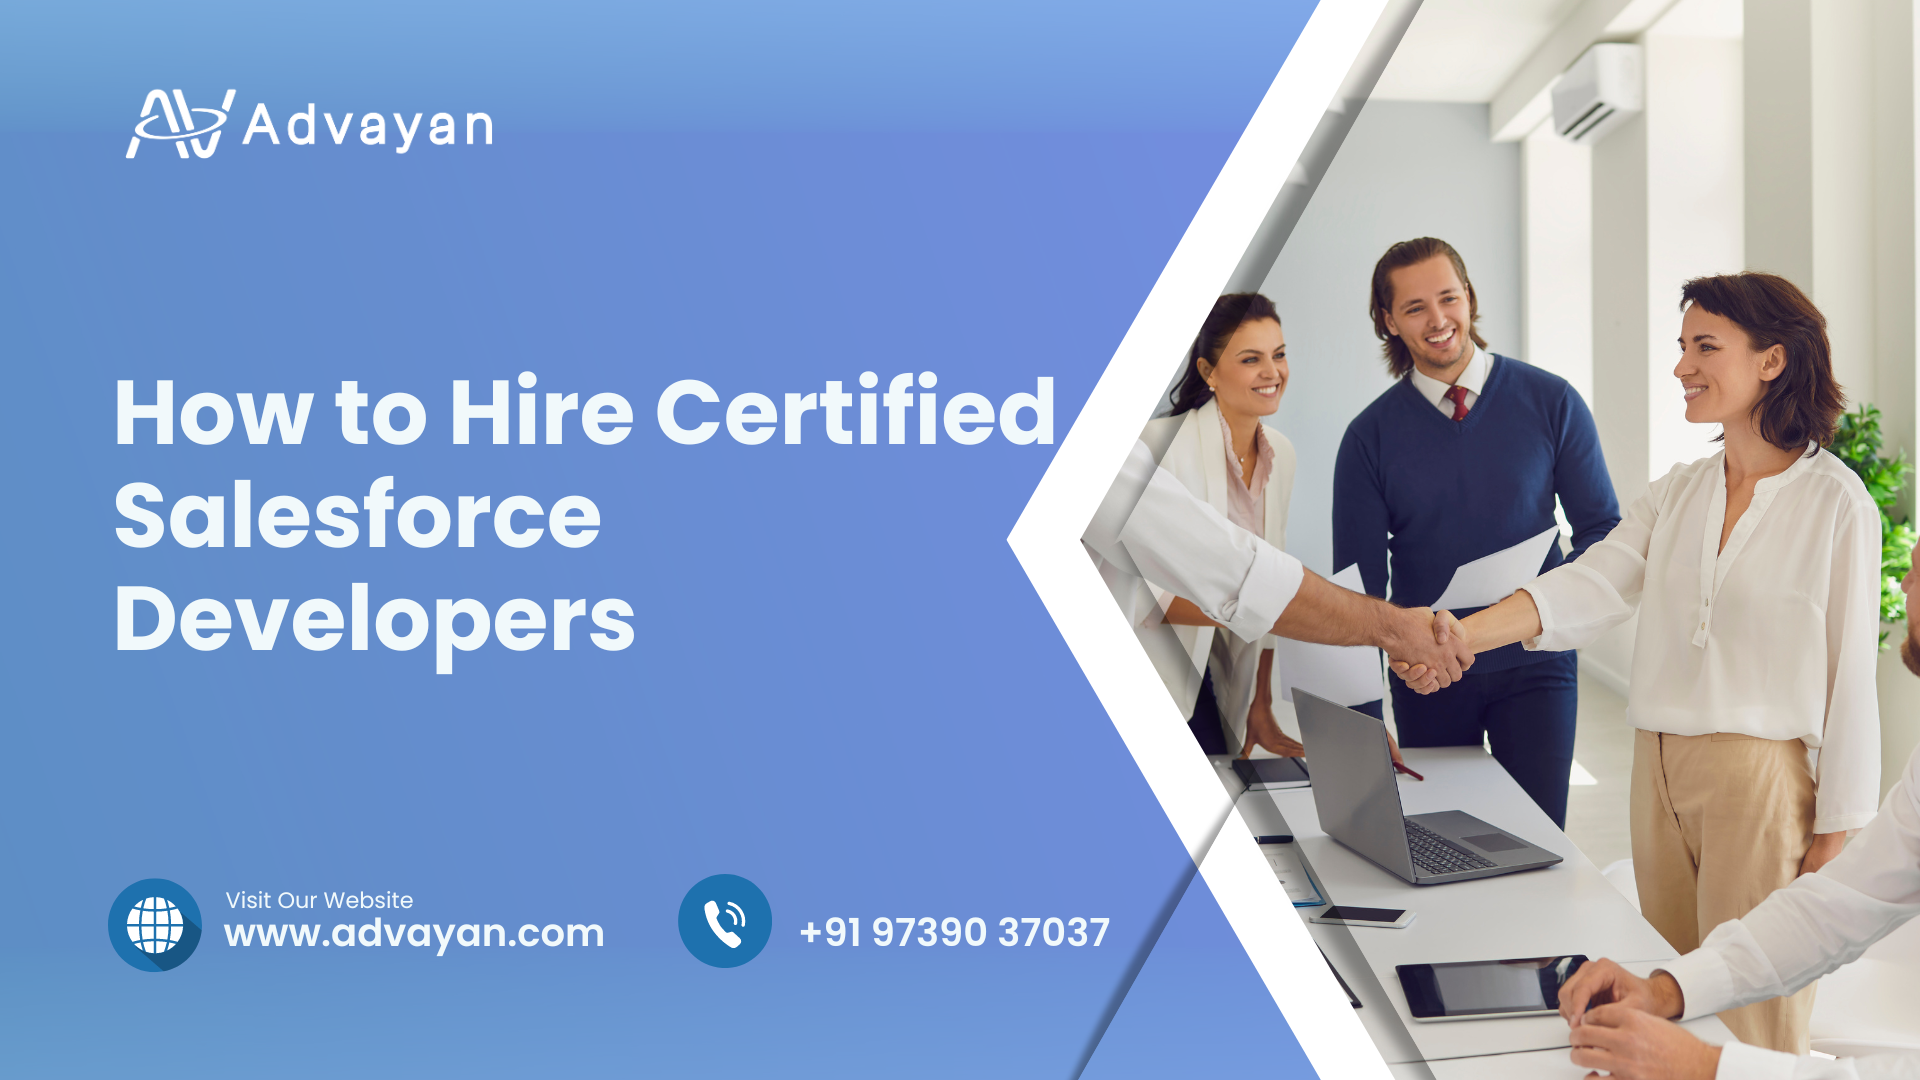 How to Hire Certified Salesforce Developers